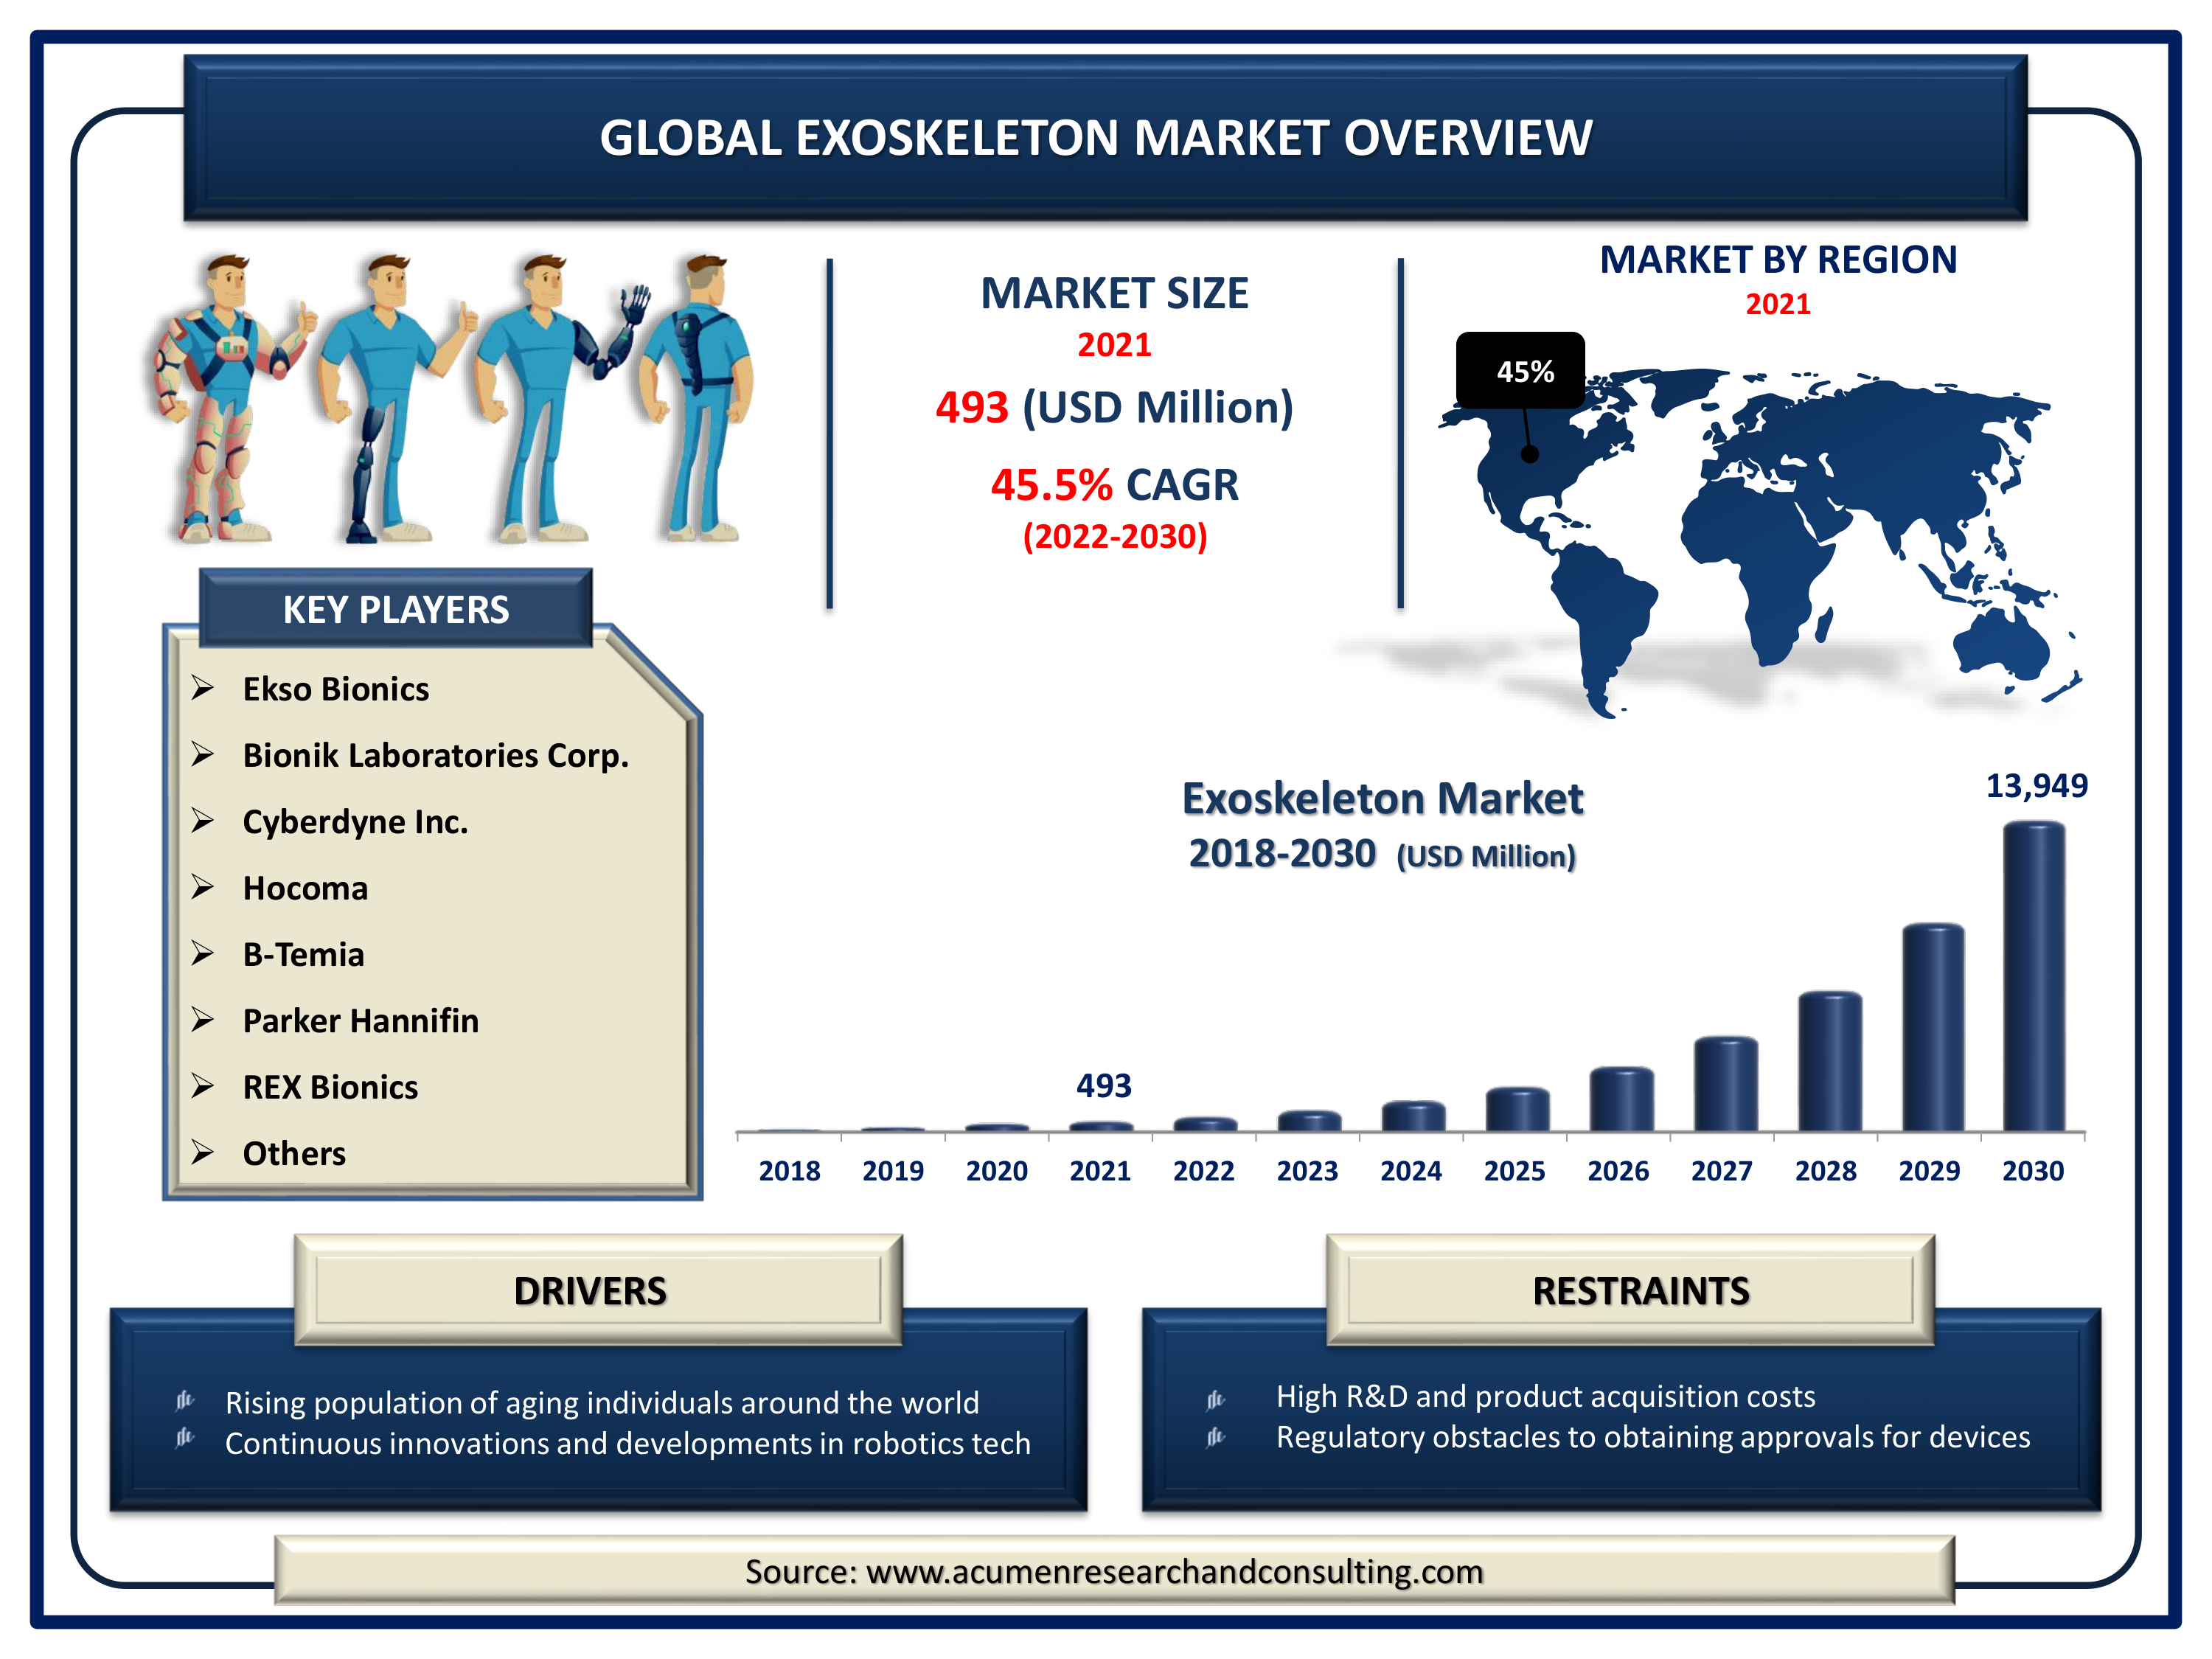 The Global Exoskeleton Market Size Accounted for USD 493 Million in 2021 and is predicted to be worth USD 13,949 Million by 2030, with a CAGR of 45.5% during the Forthcoming Period from 2022 to 2030.